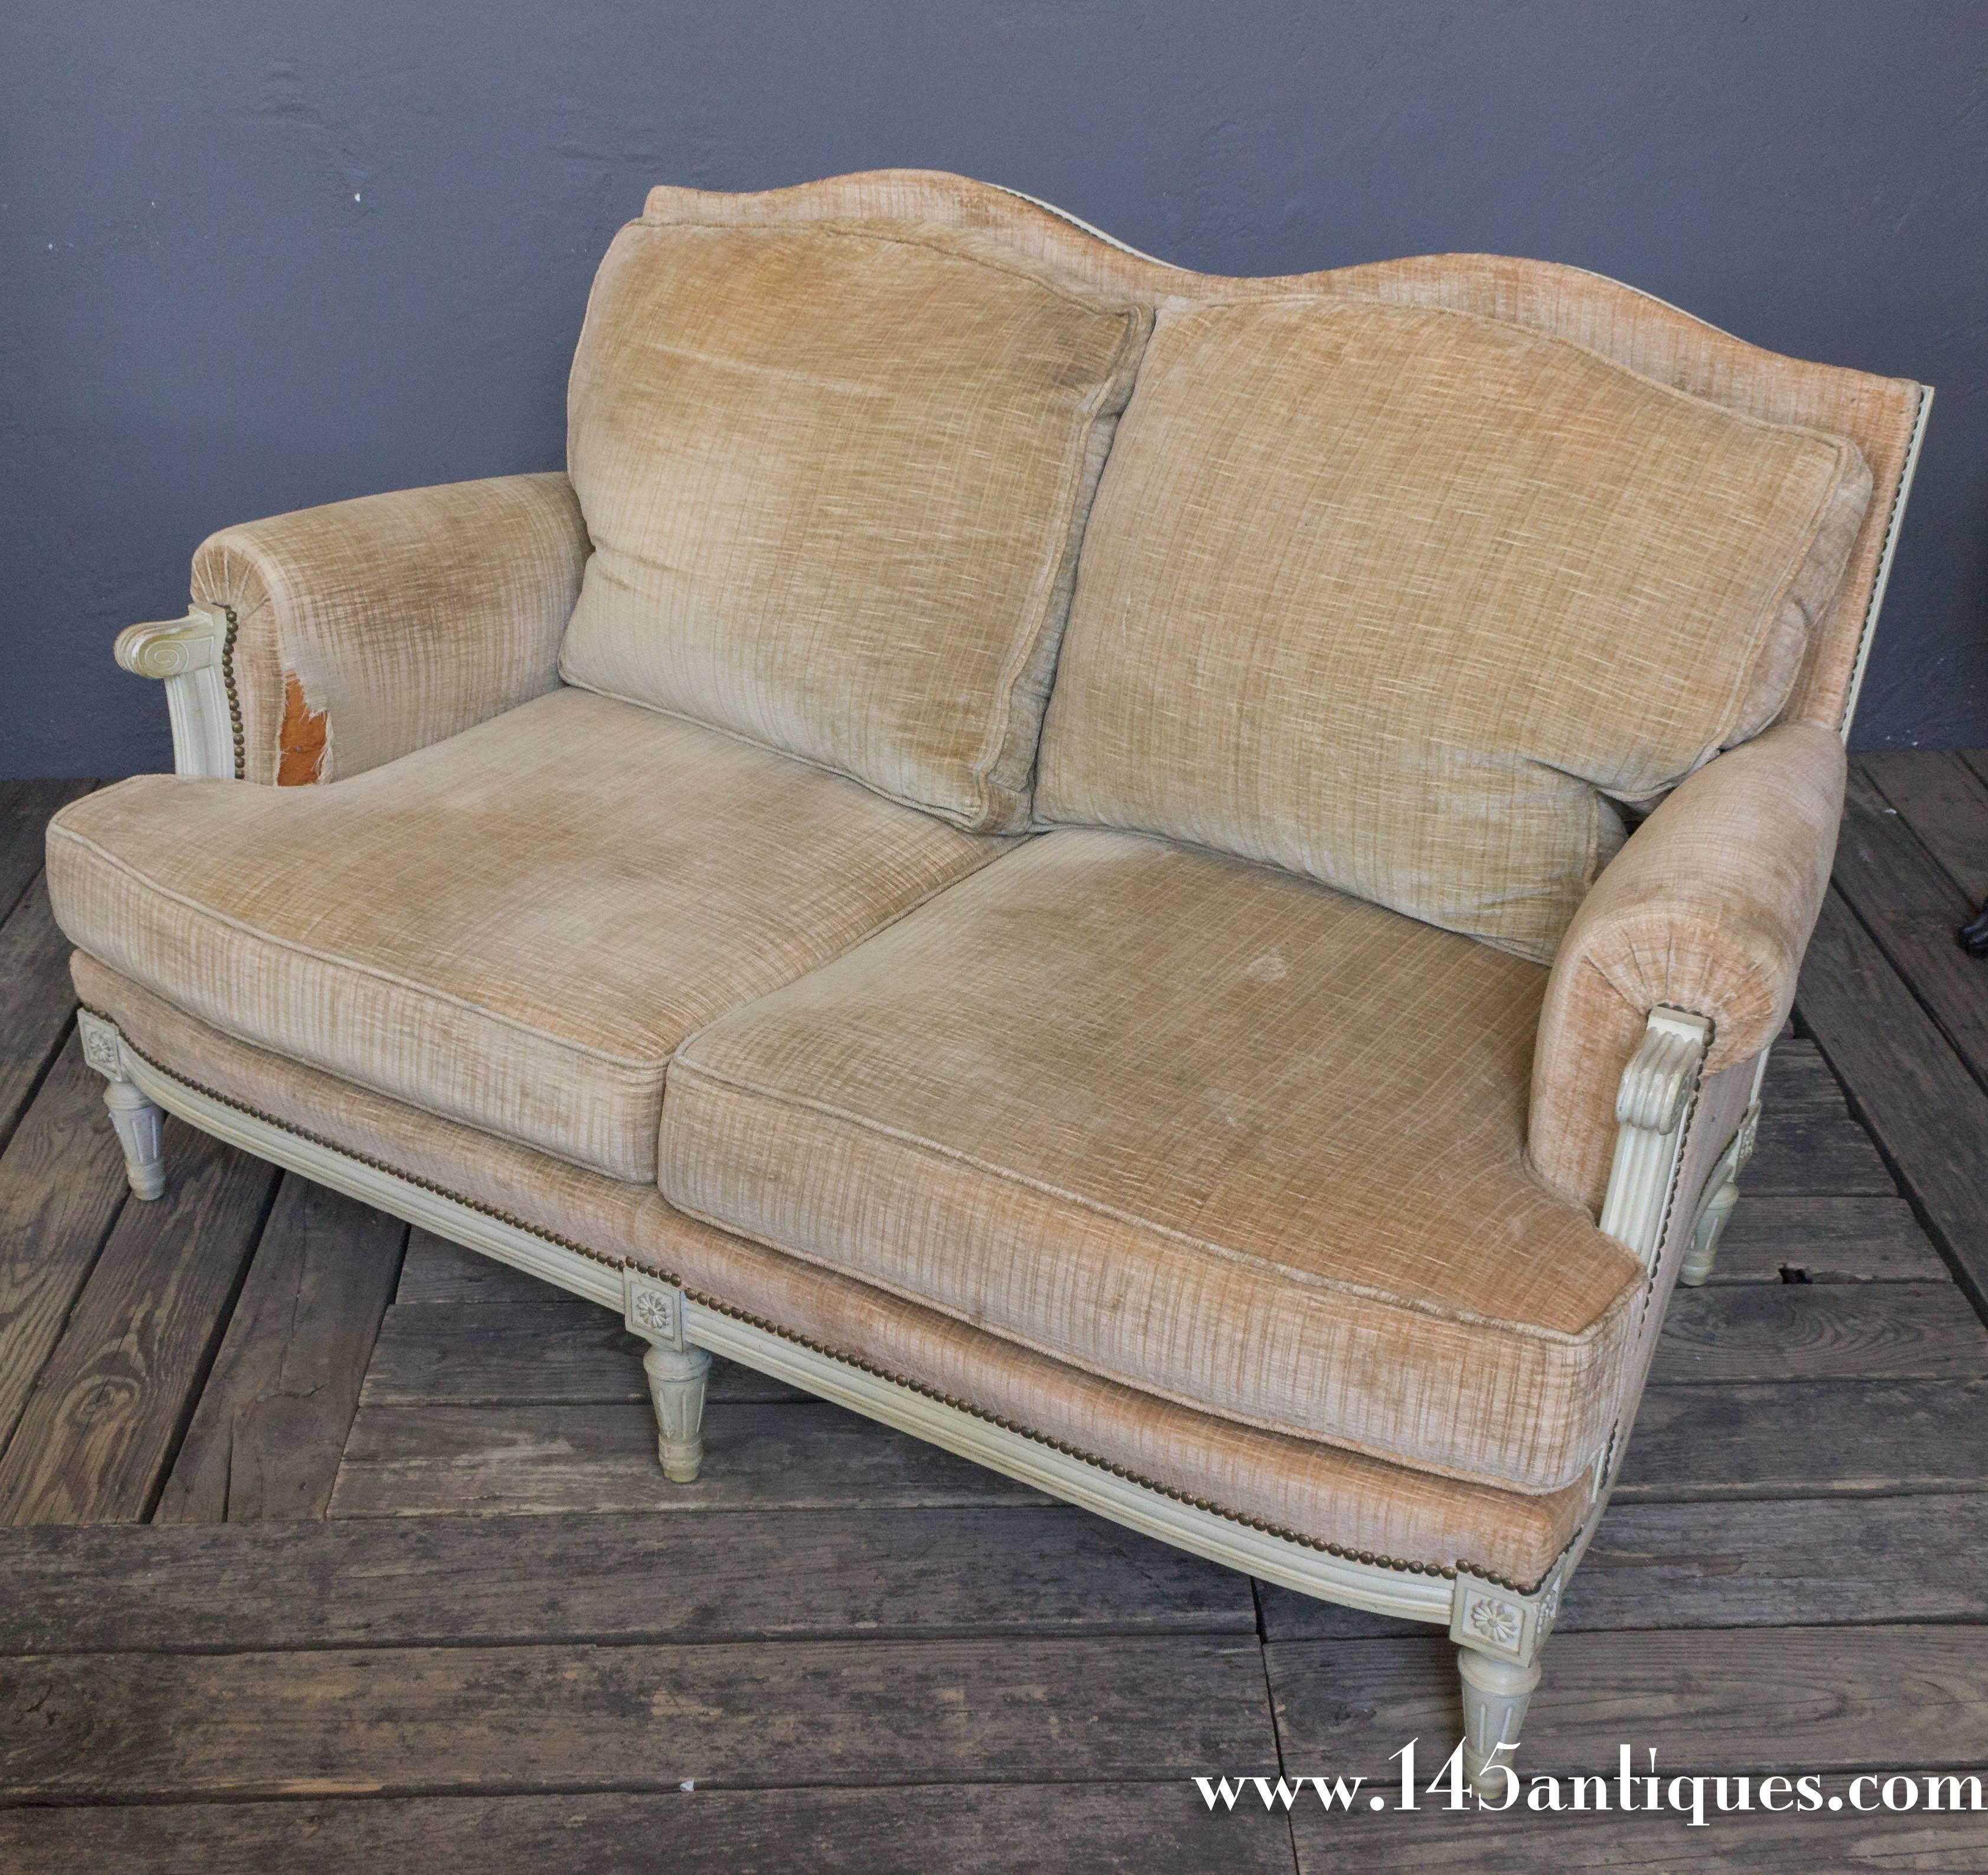 French 1950s Louis XVI style settee with white painted wood trim and faded tan velvet. This piece has two cushions.